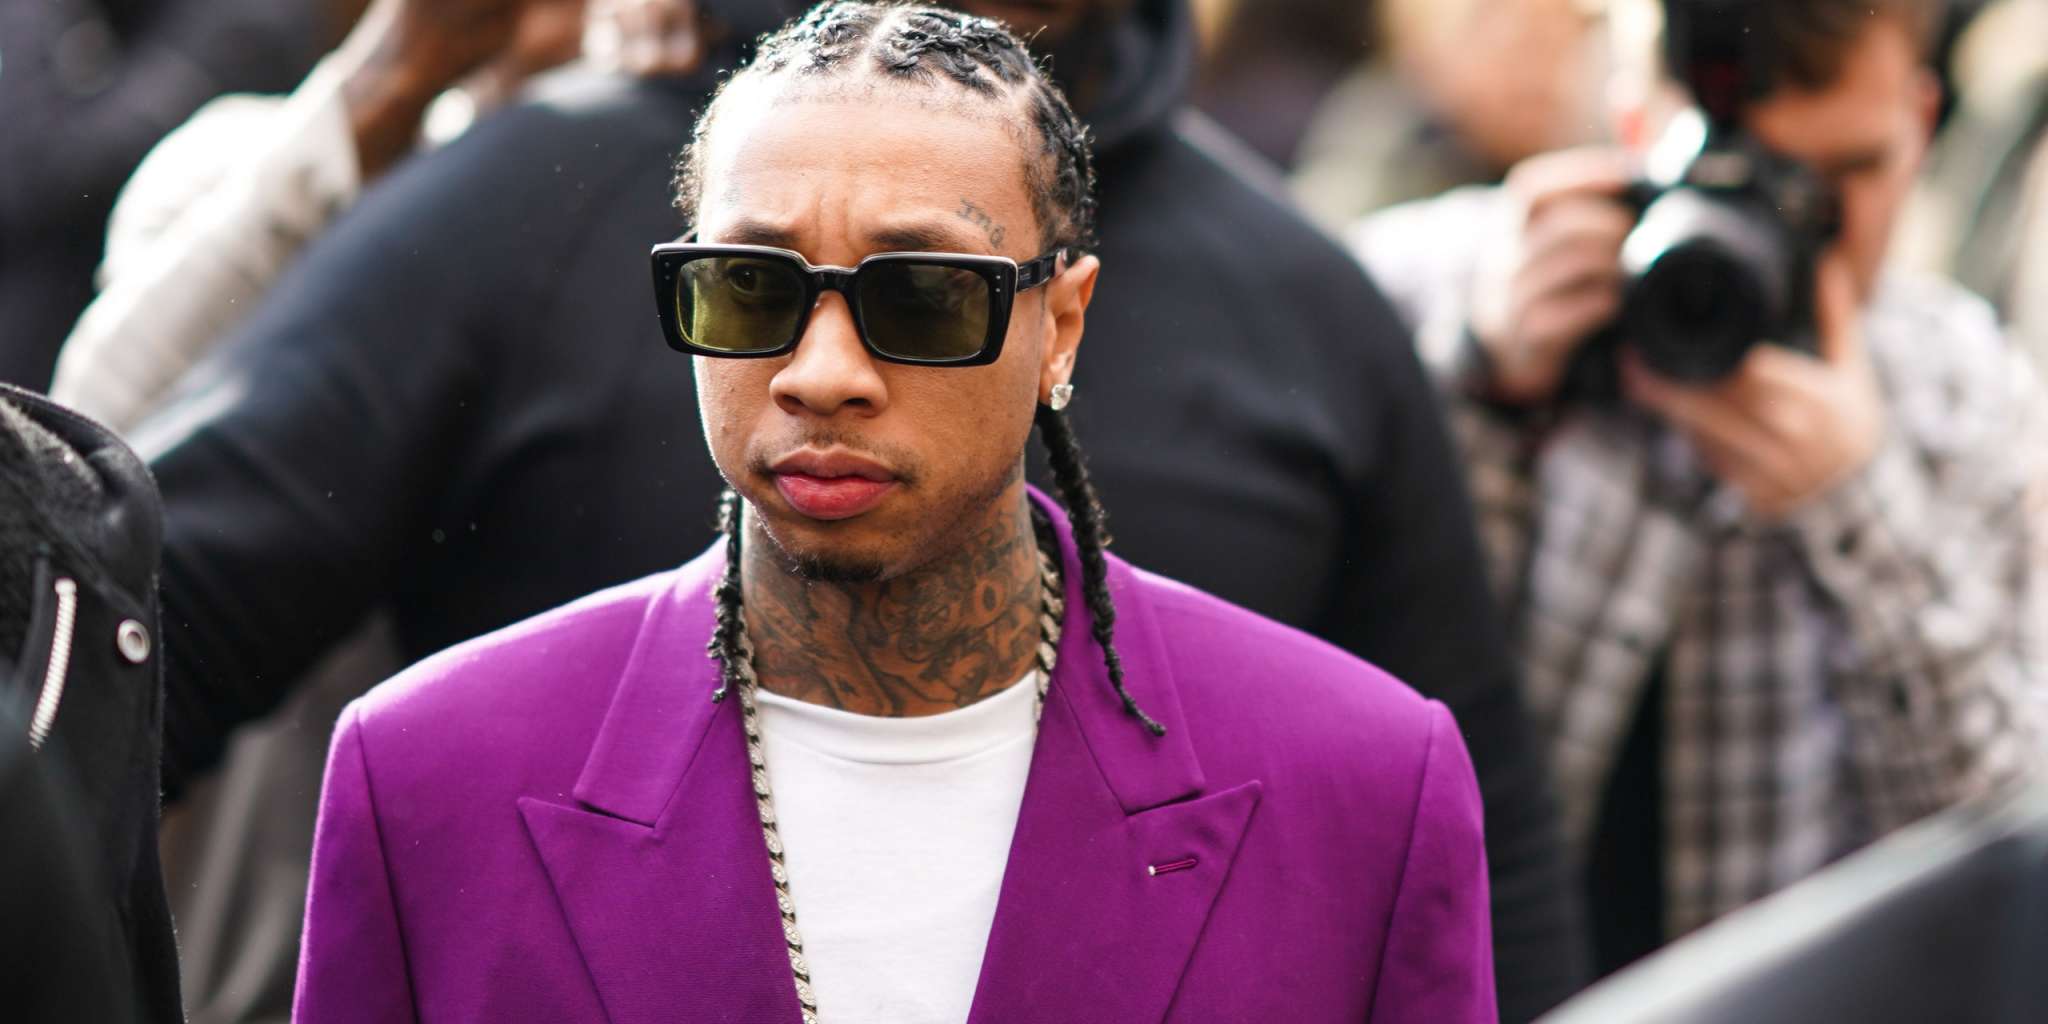 tyga-surrendered-to-the-police-following-alleged-assault-his-ex-gf-is-involved